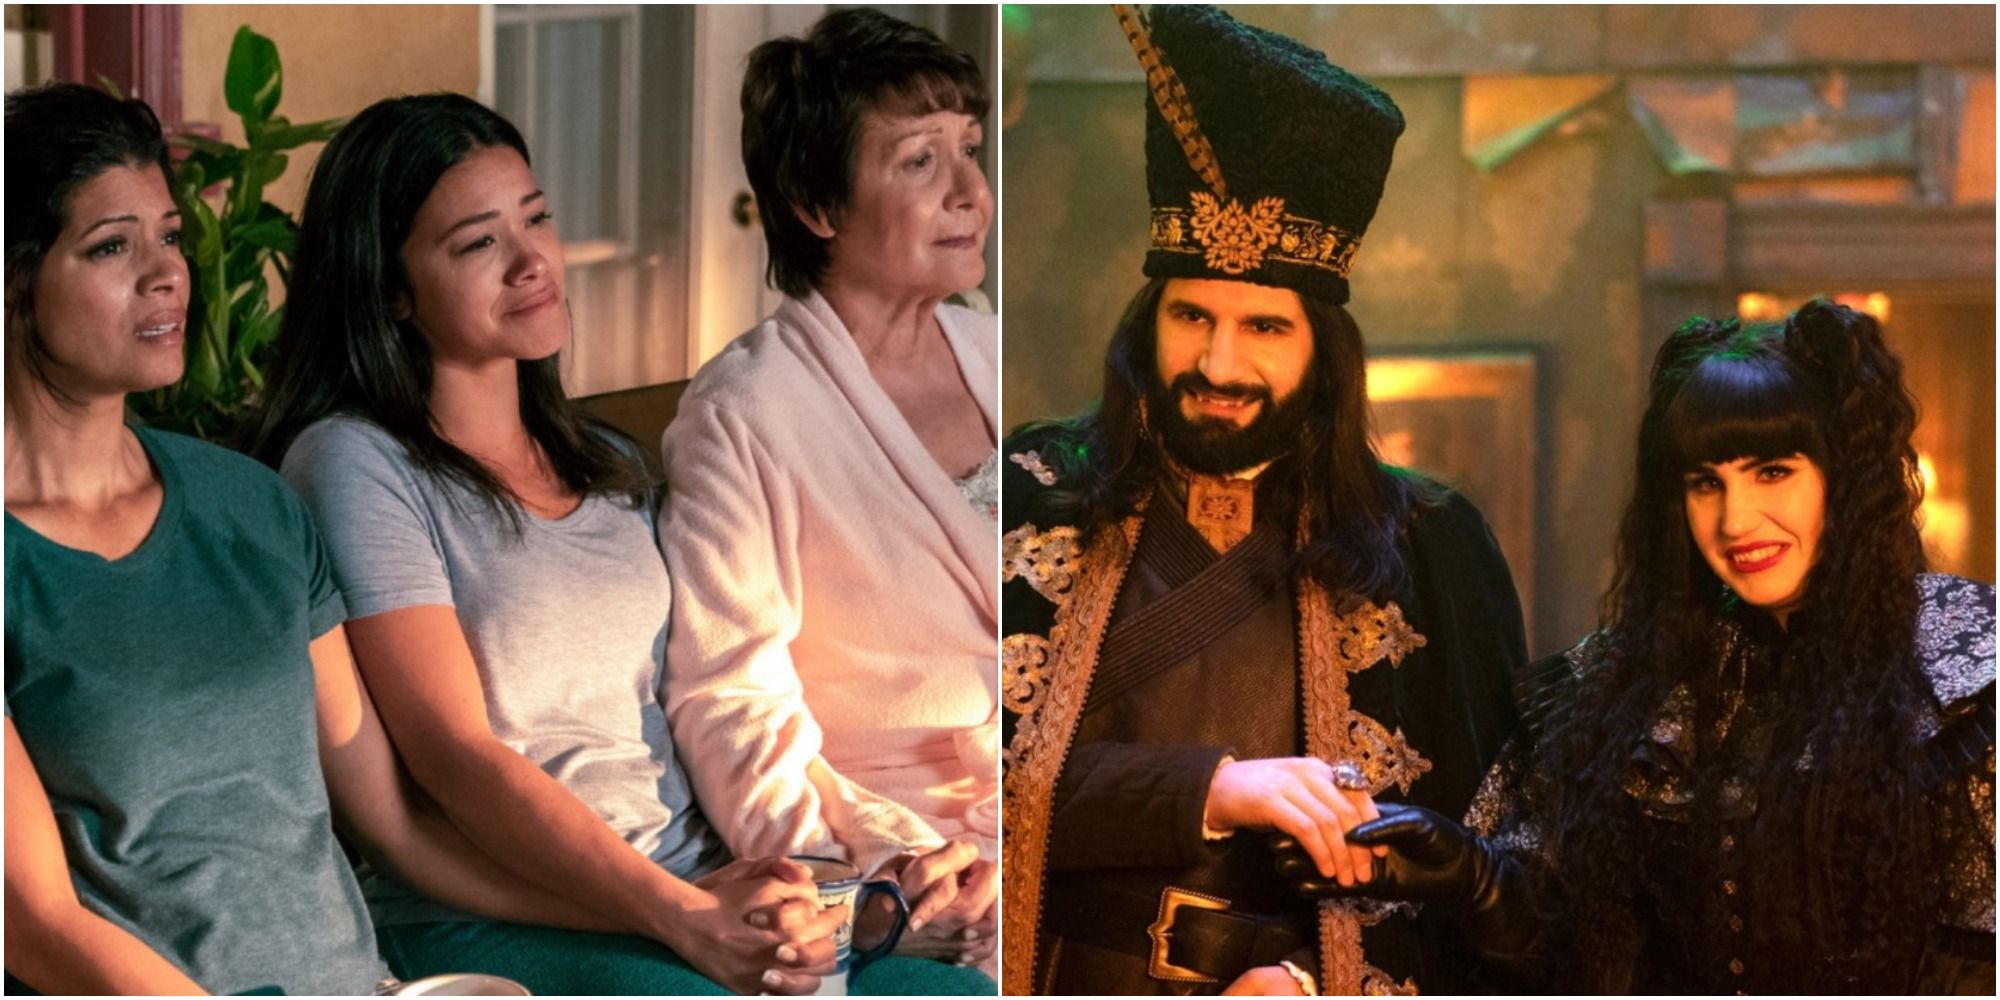 Jane the virgin & What we do in the shadows